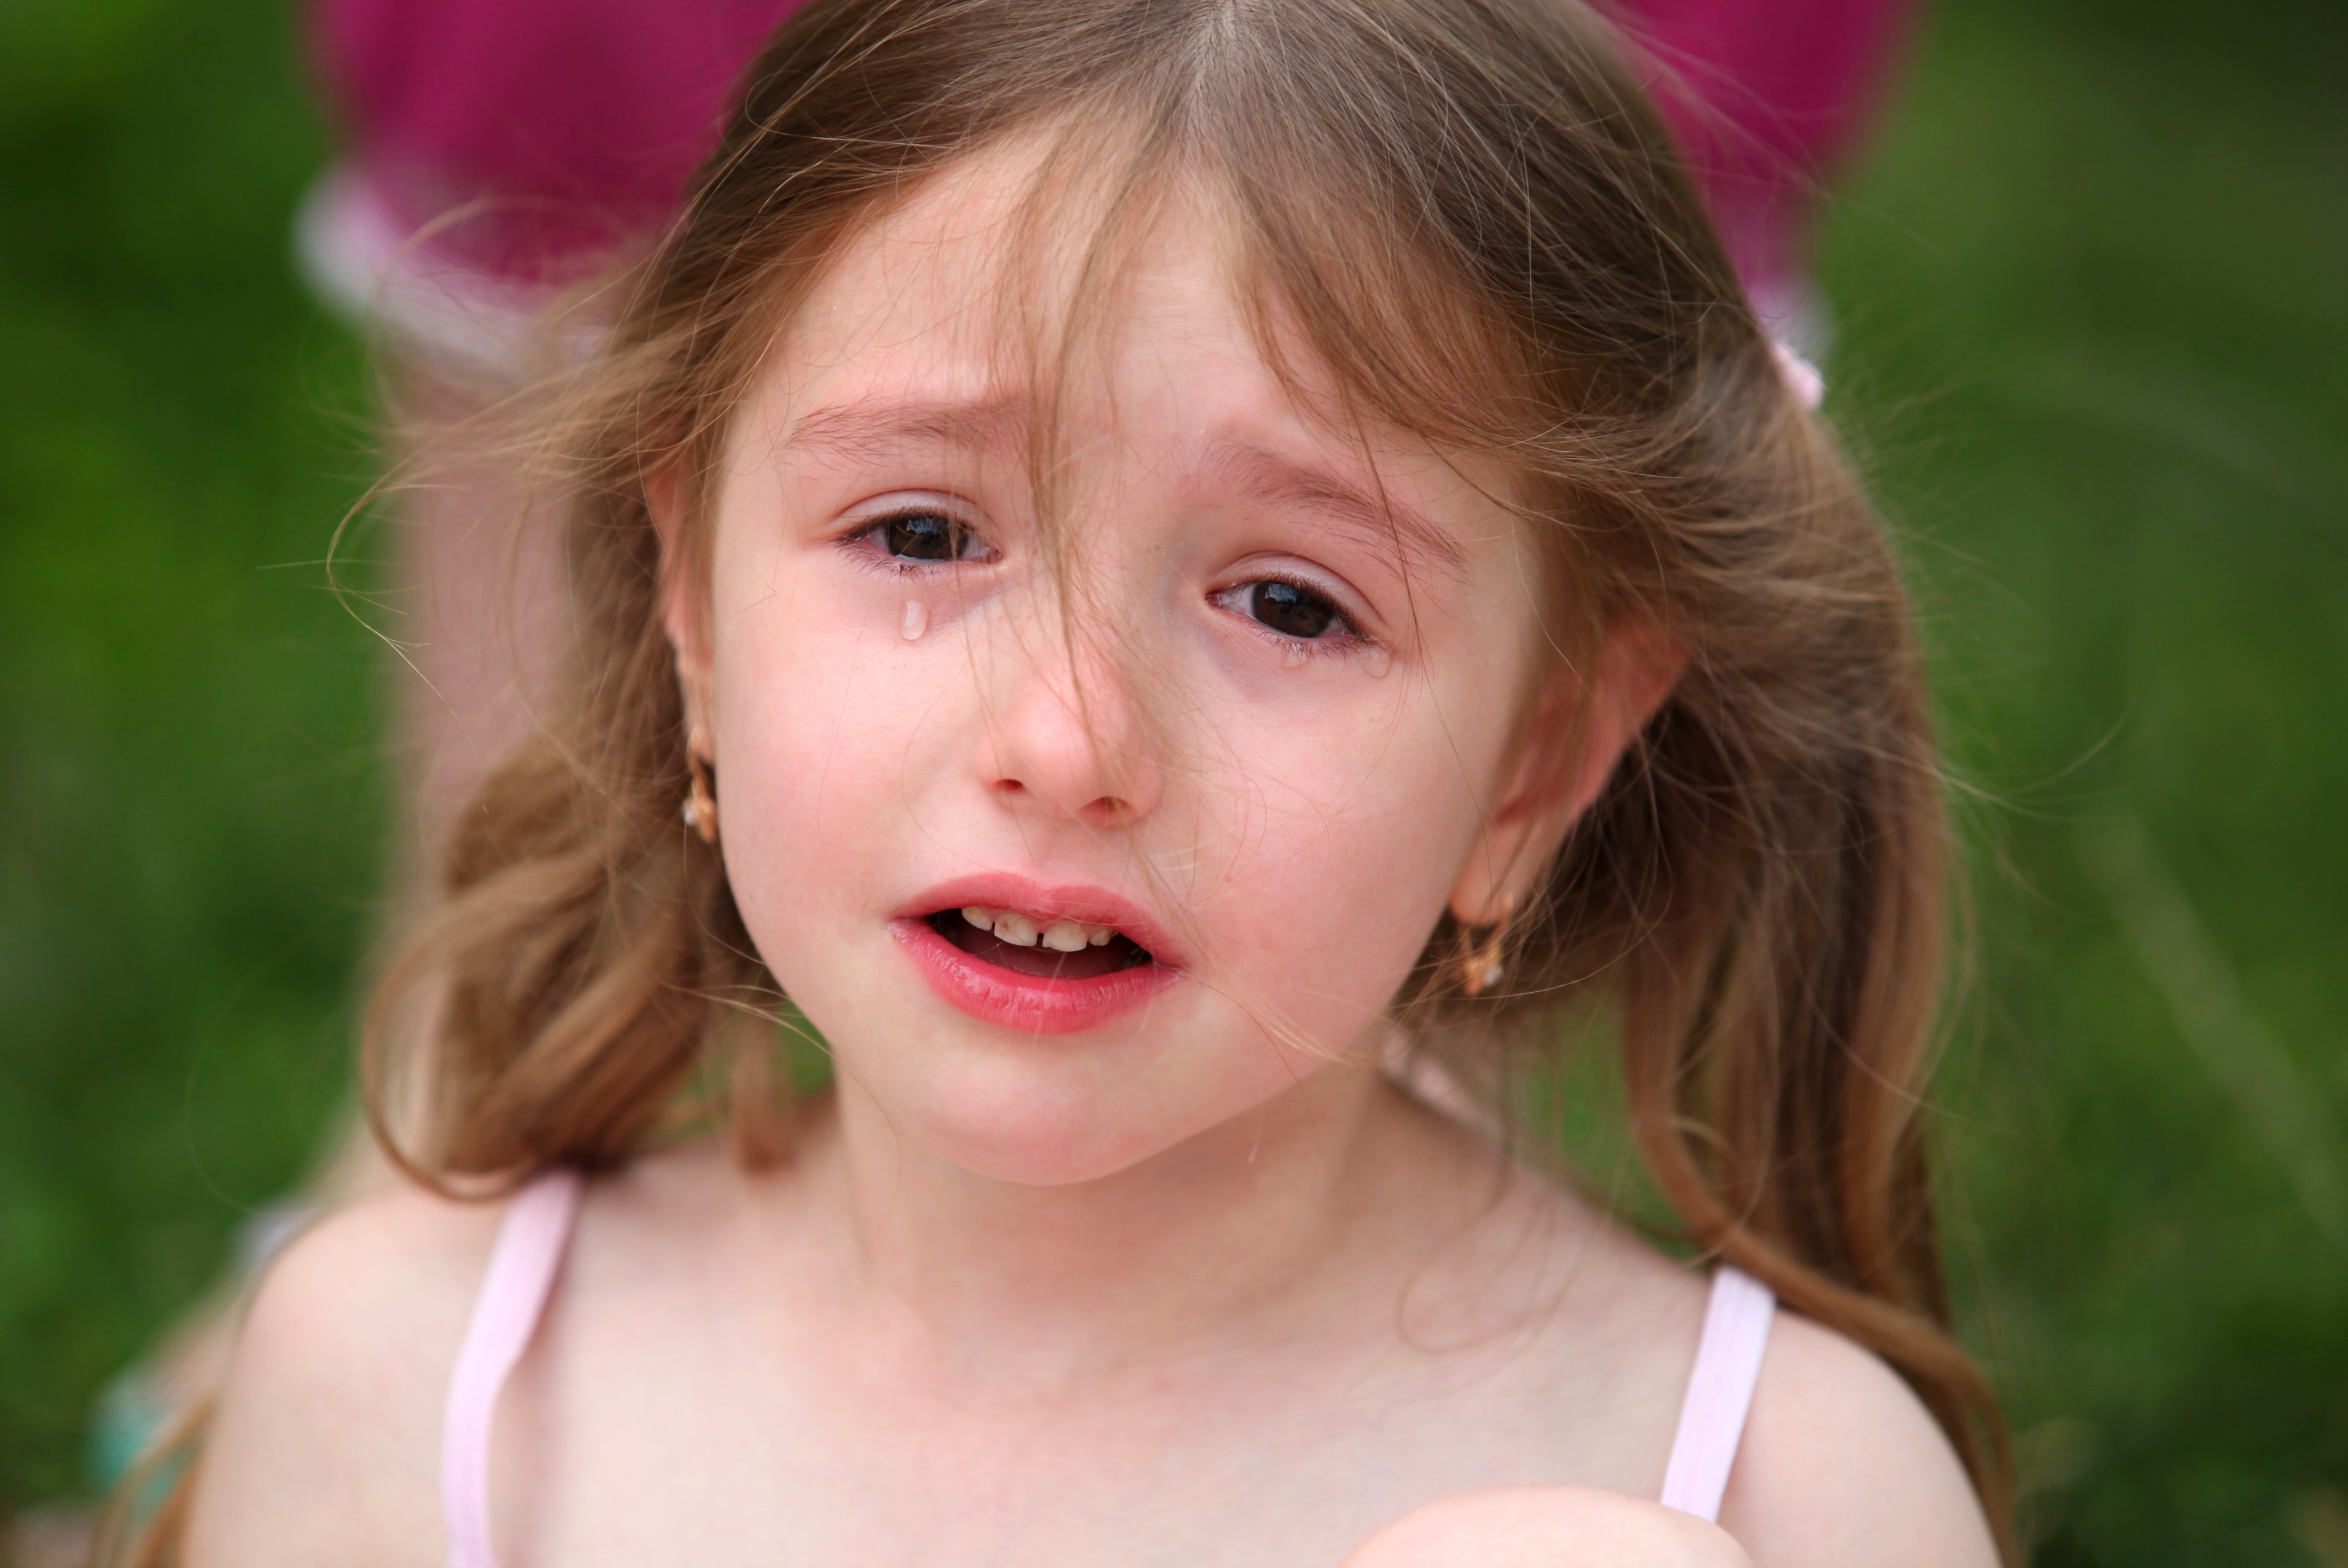 a cute brunette child girl crying, July 2013